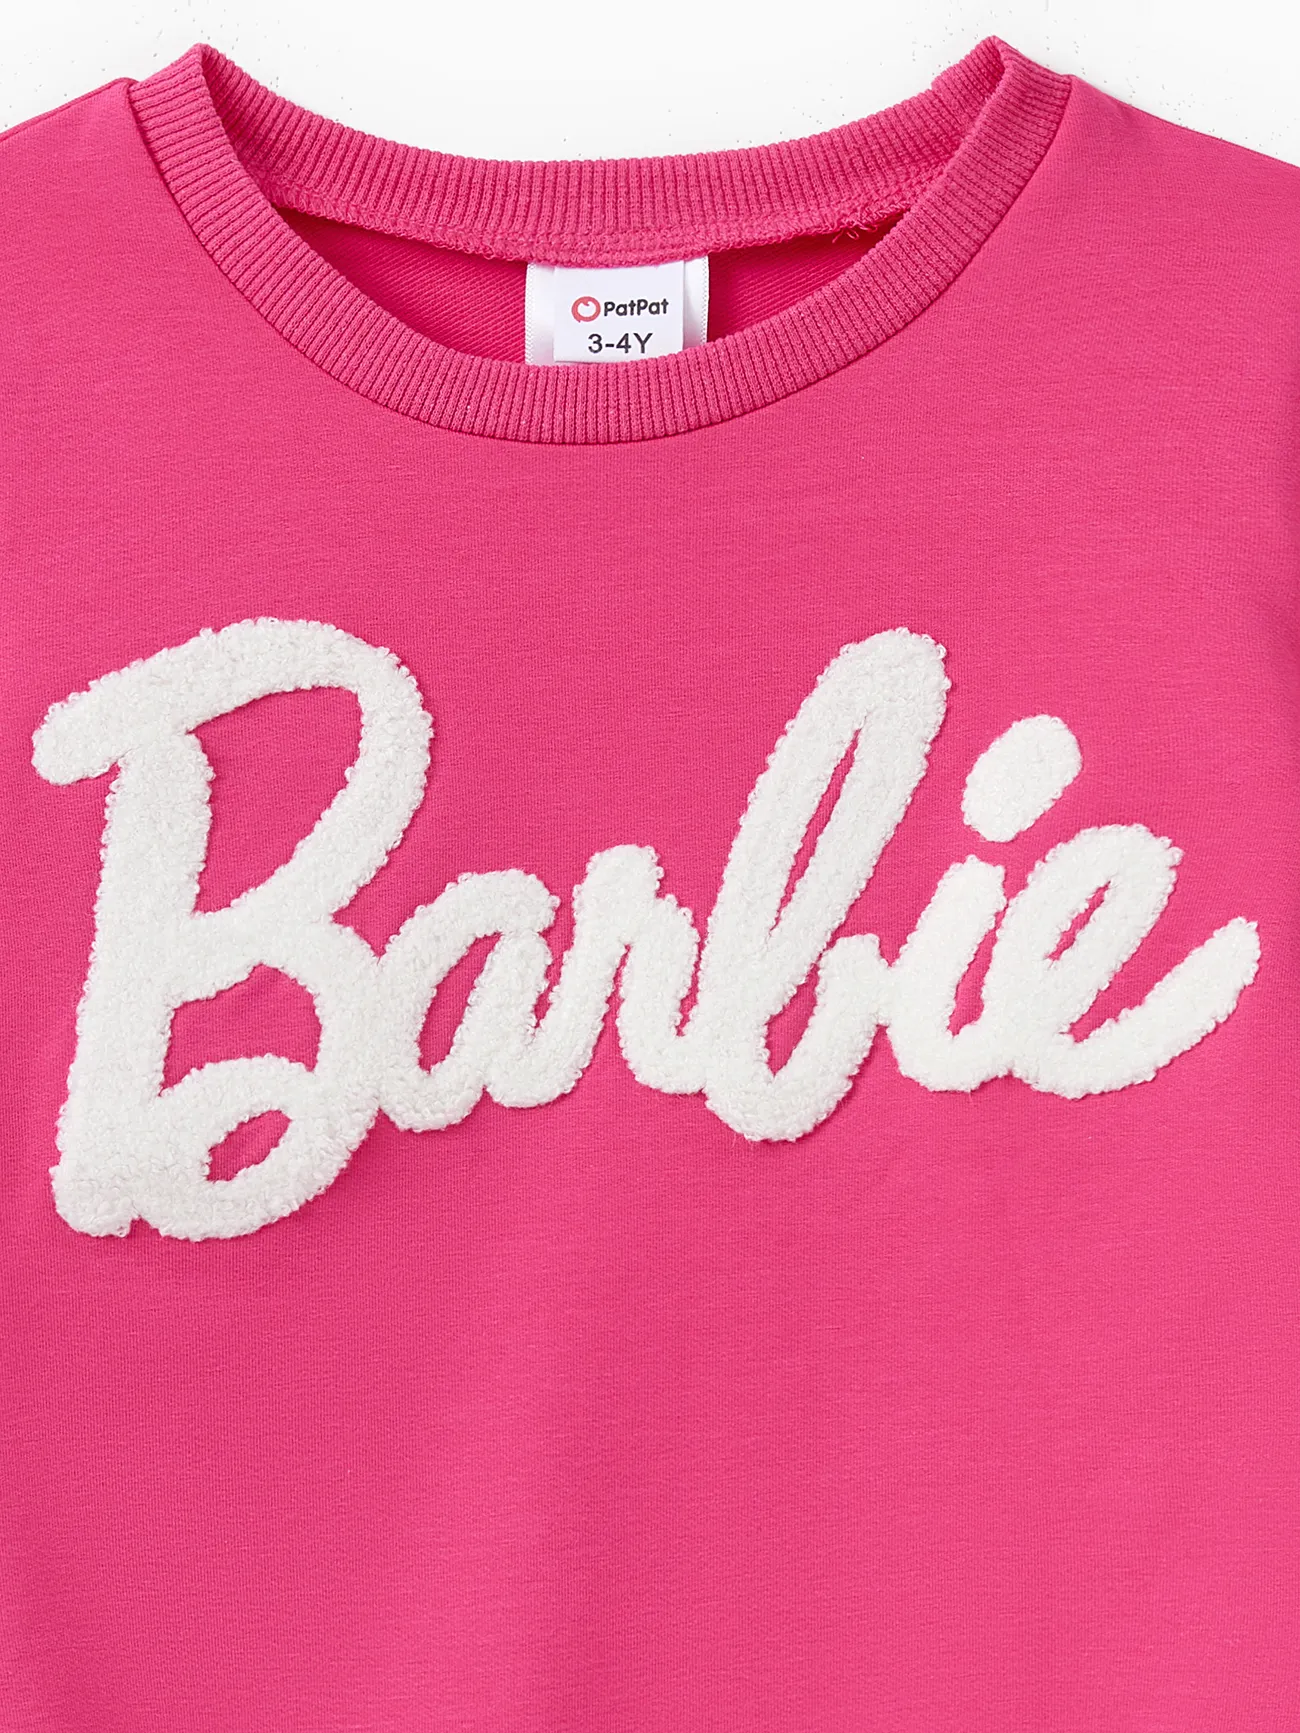 Barbie Mommy and Me Letter Embroidered Long-sleeve Cotton Sweatshirt Roseo big image 1